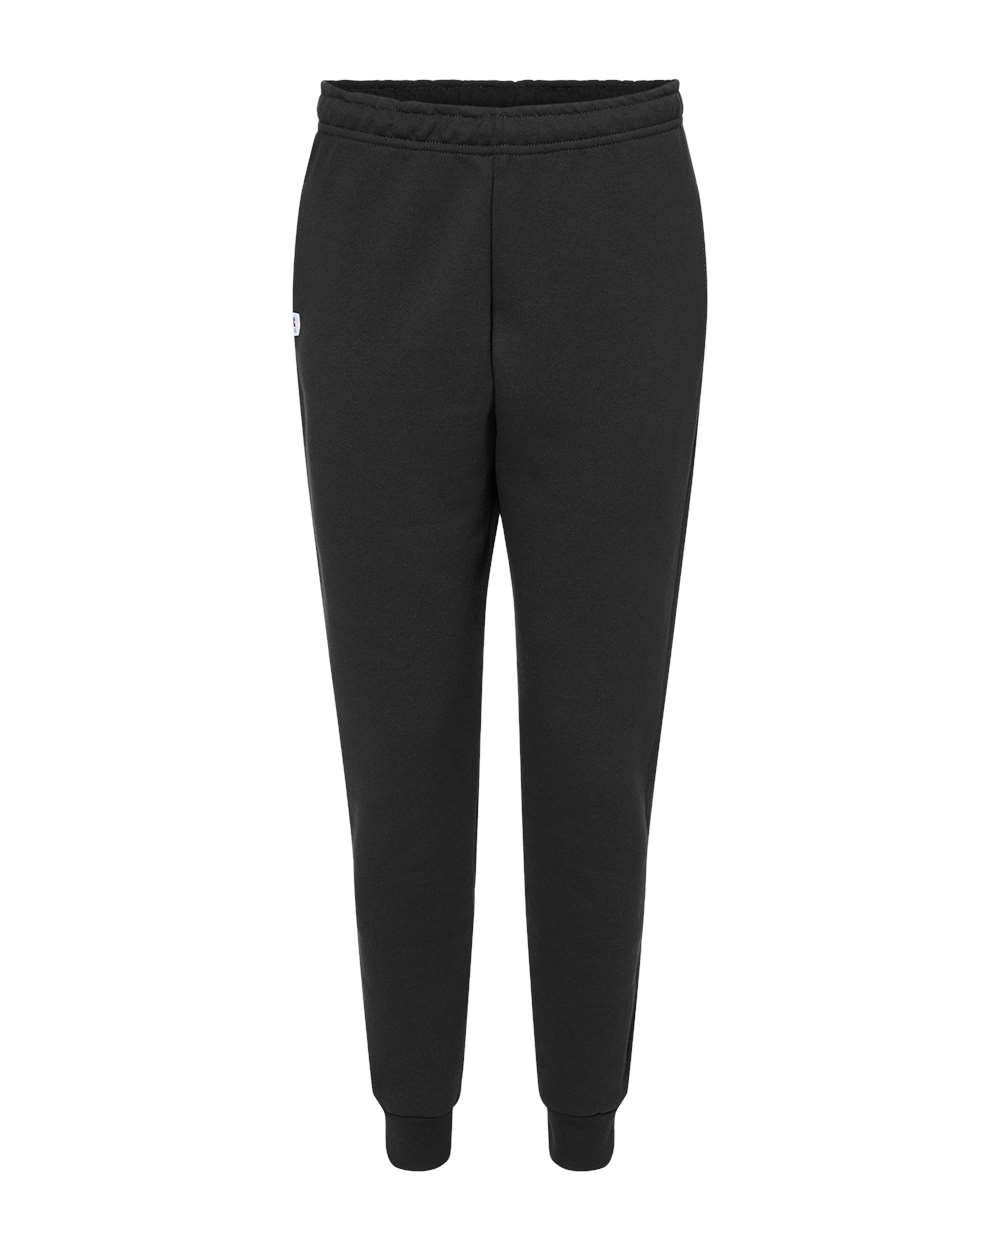 50/50 Fleece Joggers-Russell Athletic